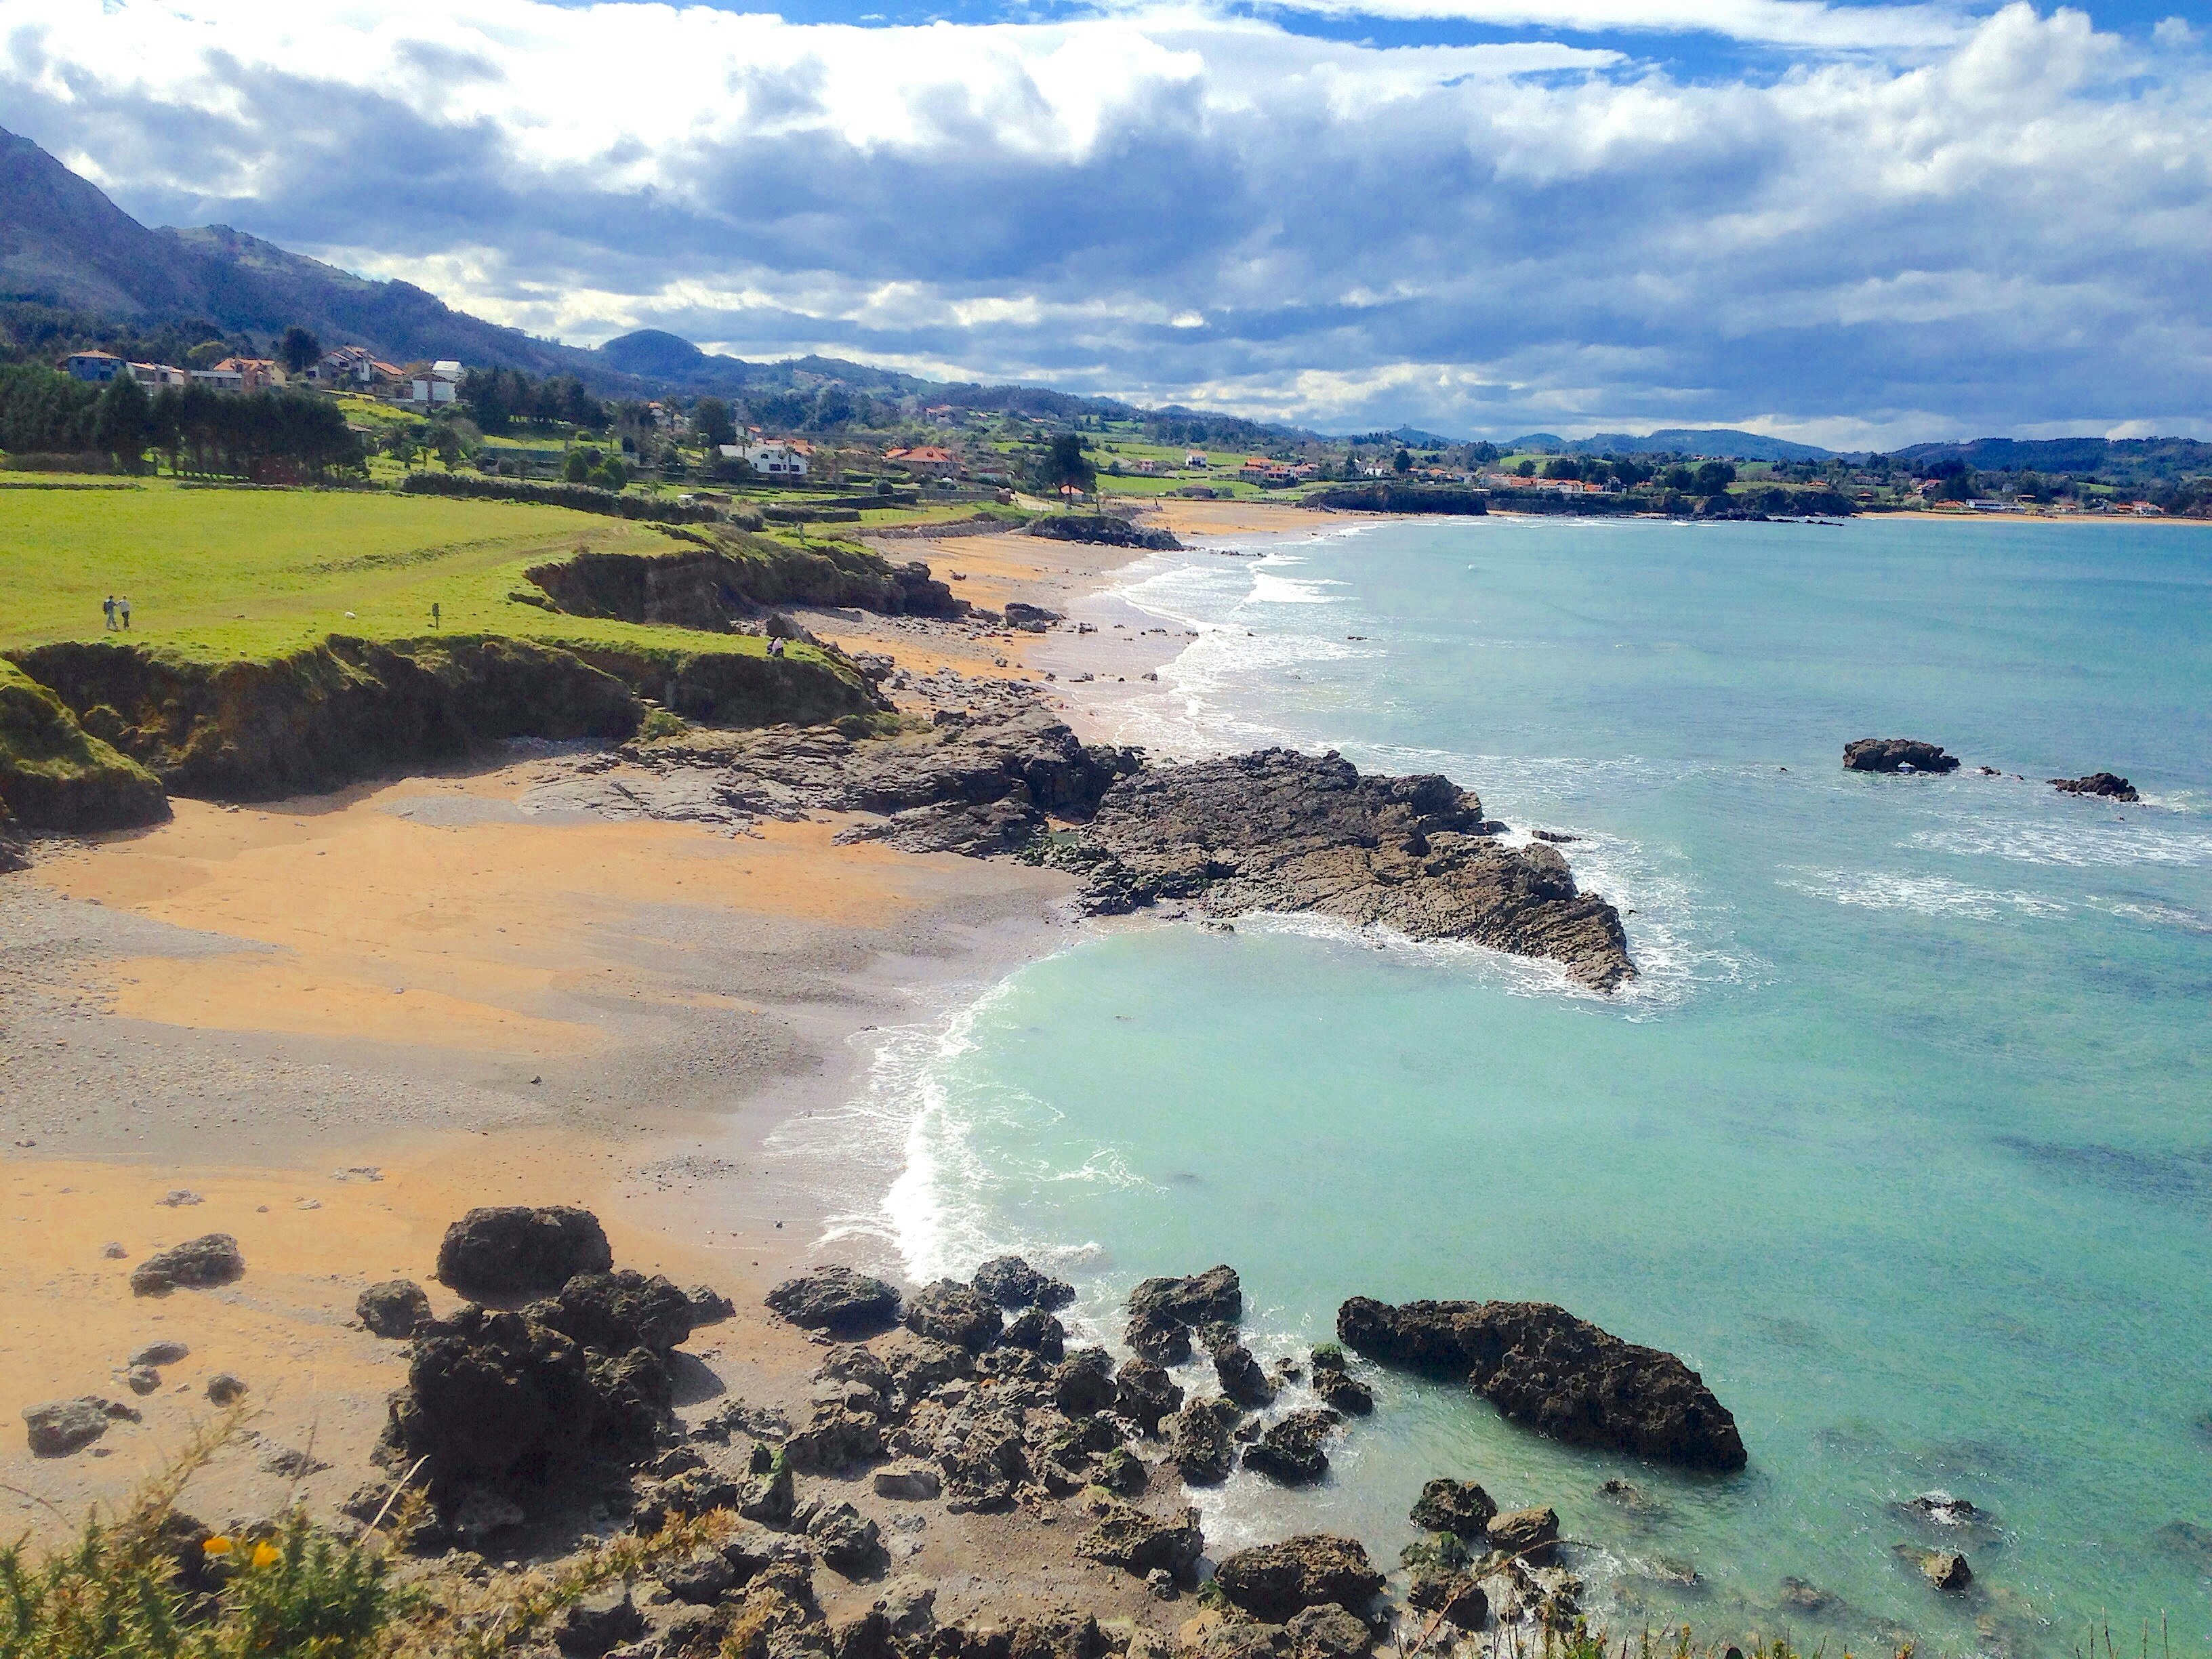 A coastal scene on the Camino del Norte; there's a rocky beach with calm turquoise water backed by pasture and rugged hills.